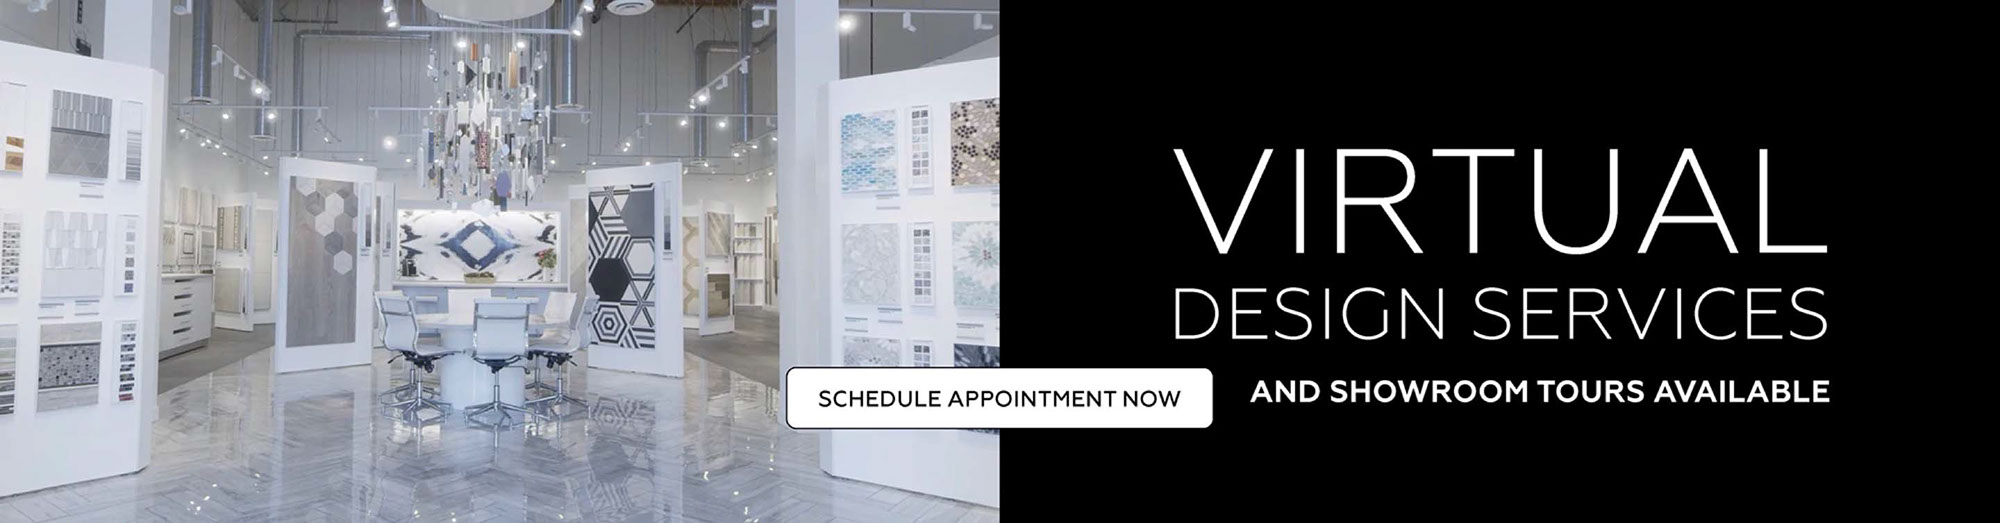 Virtual Design Services and Showroom Tours Available: Schedule Appointment Now